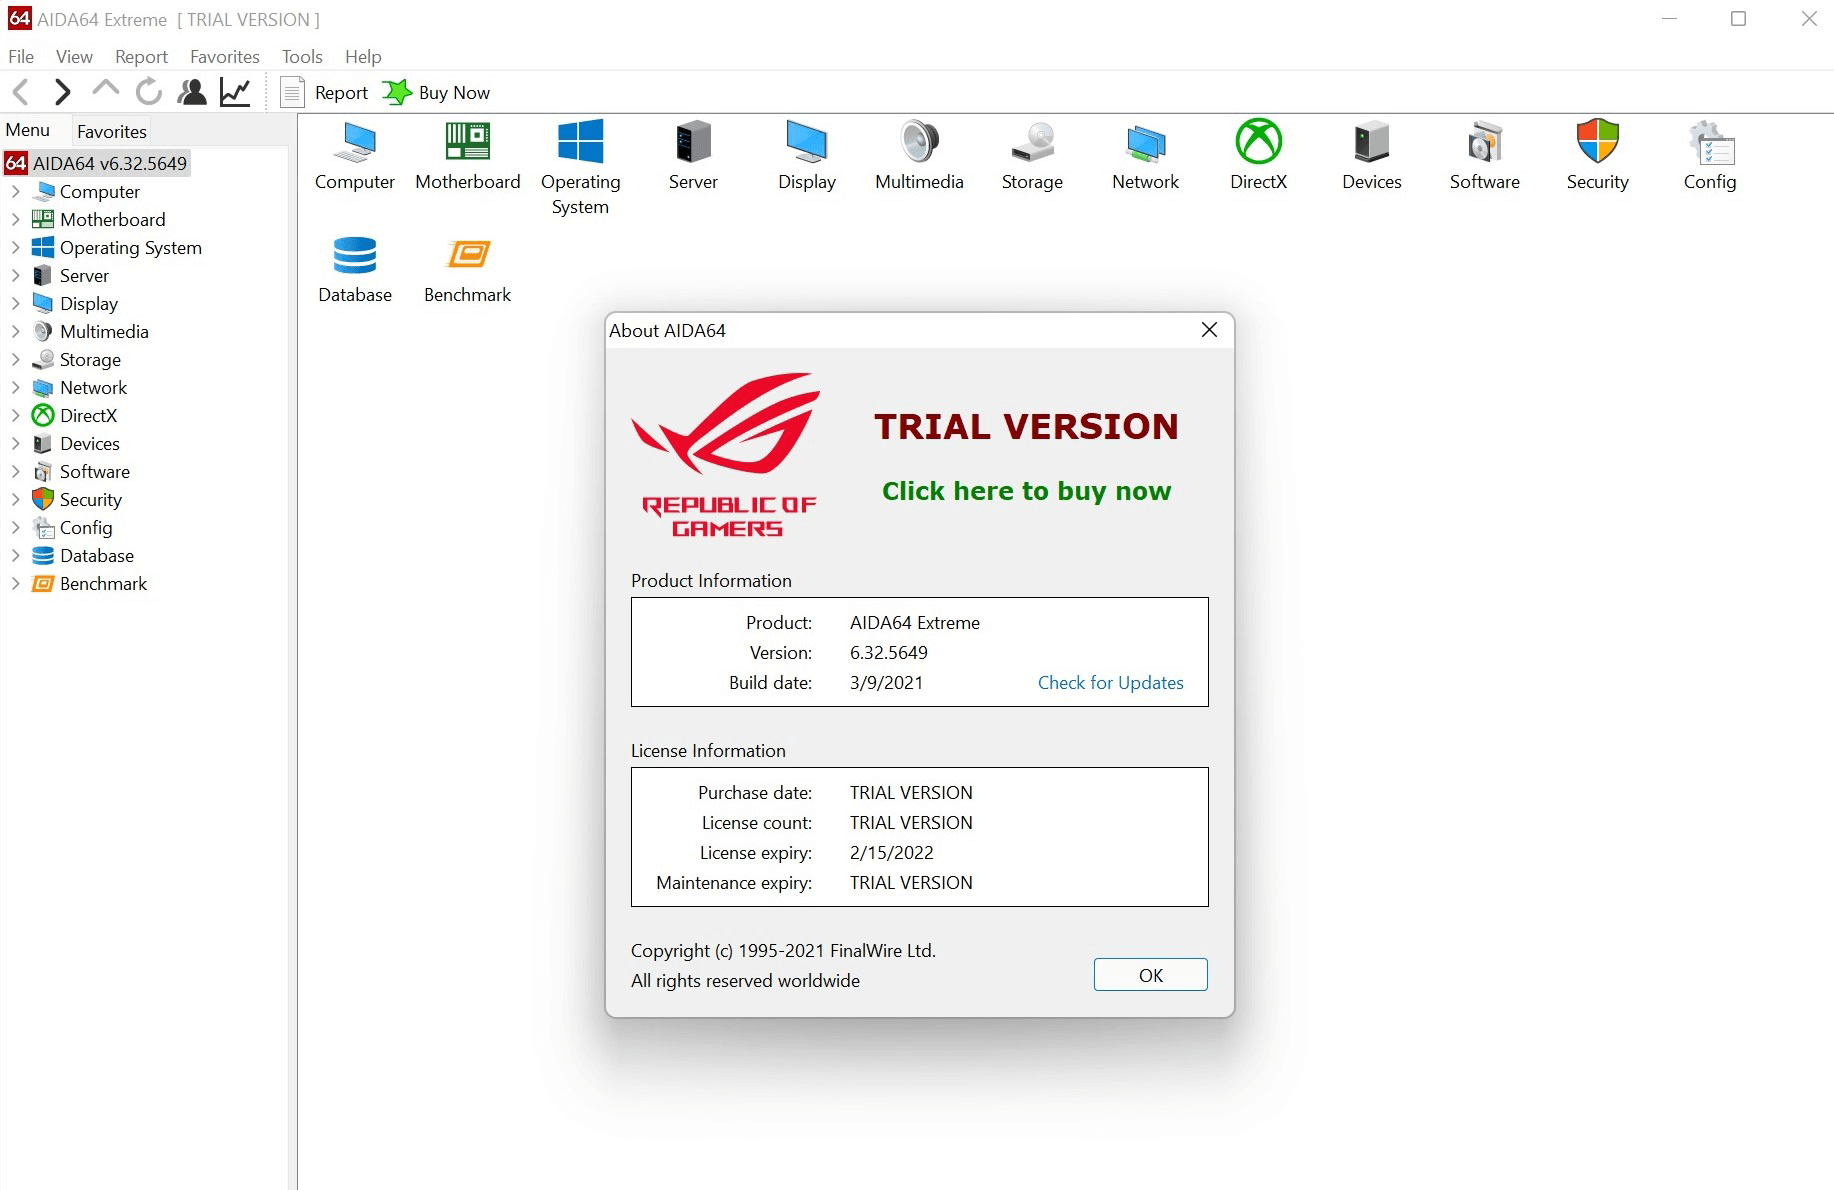 ROG Strix Z790-I comes with a free 60 day trial of AIDA64 Extreme